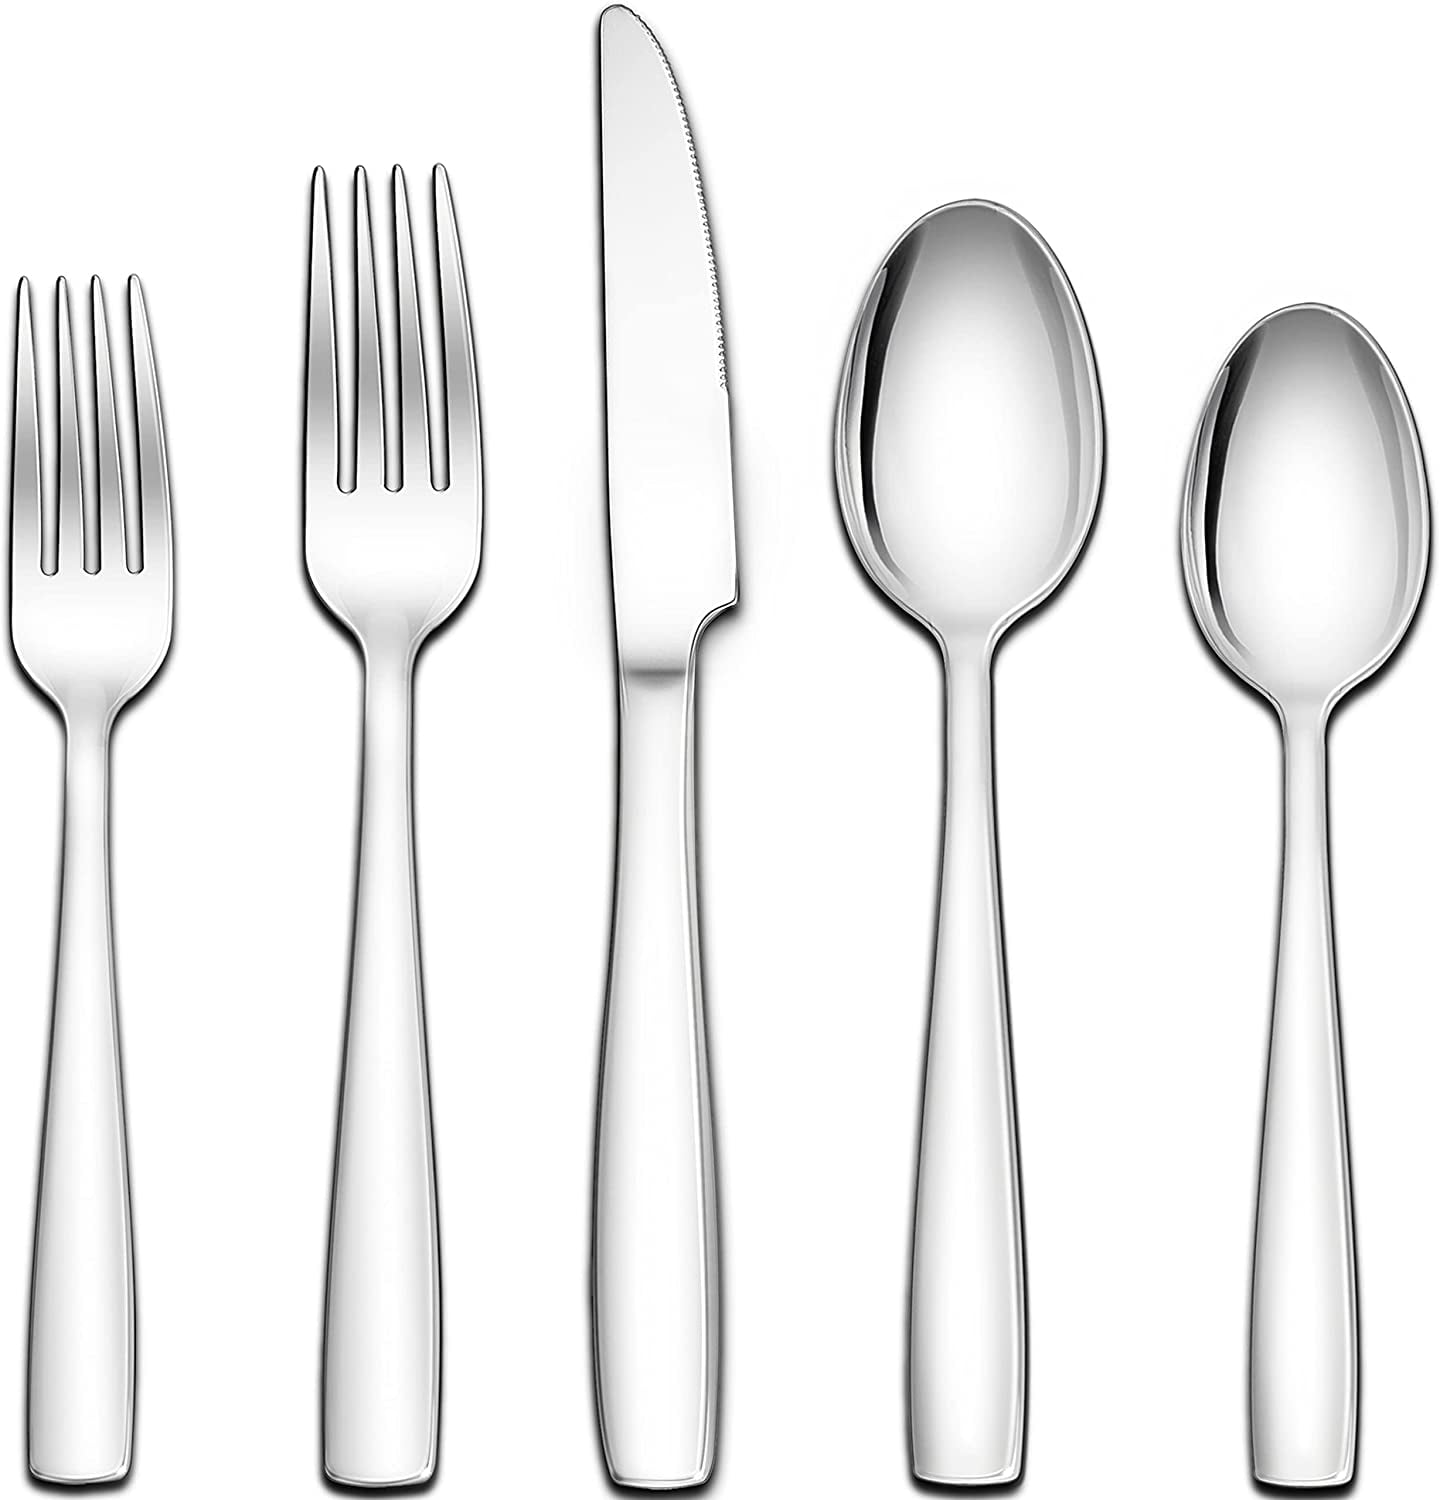 Wildone 60-Piece Black Silverware Set, Stainless Steel Flatware Square  Cutlery Set Service for 12, Eating Utensils Include Knife Fork Spoon,  Mirror